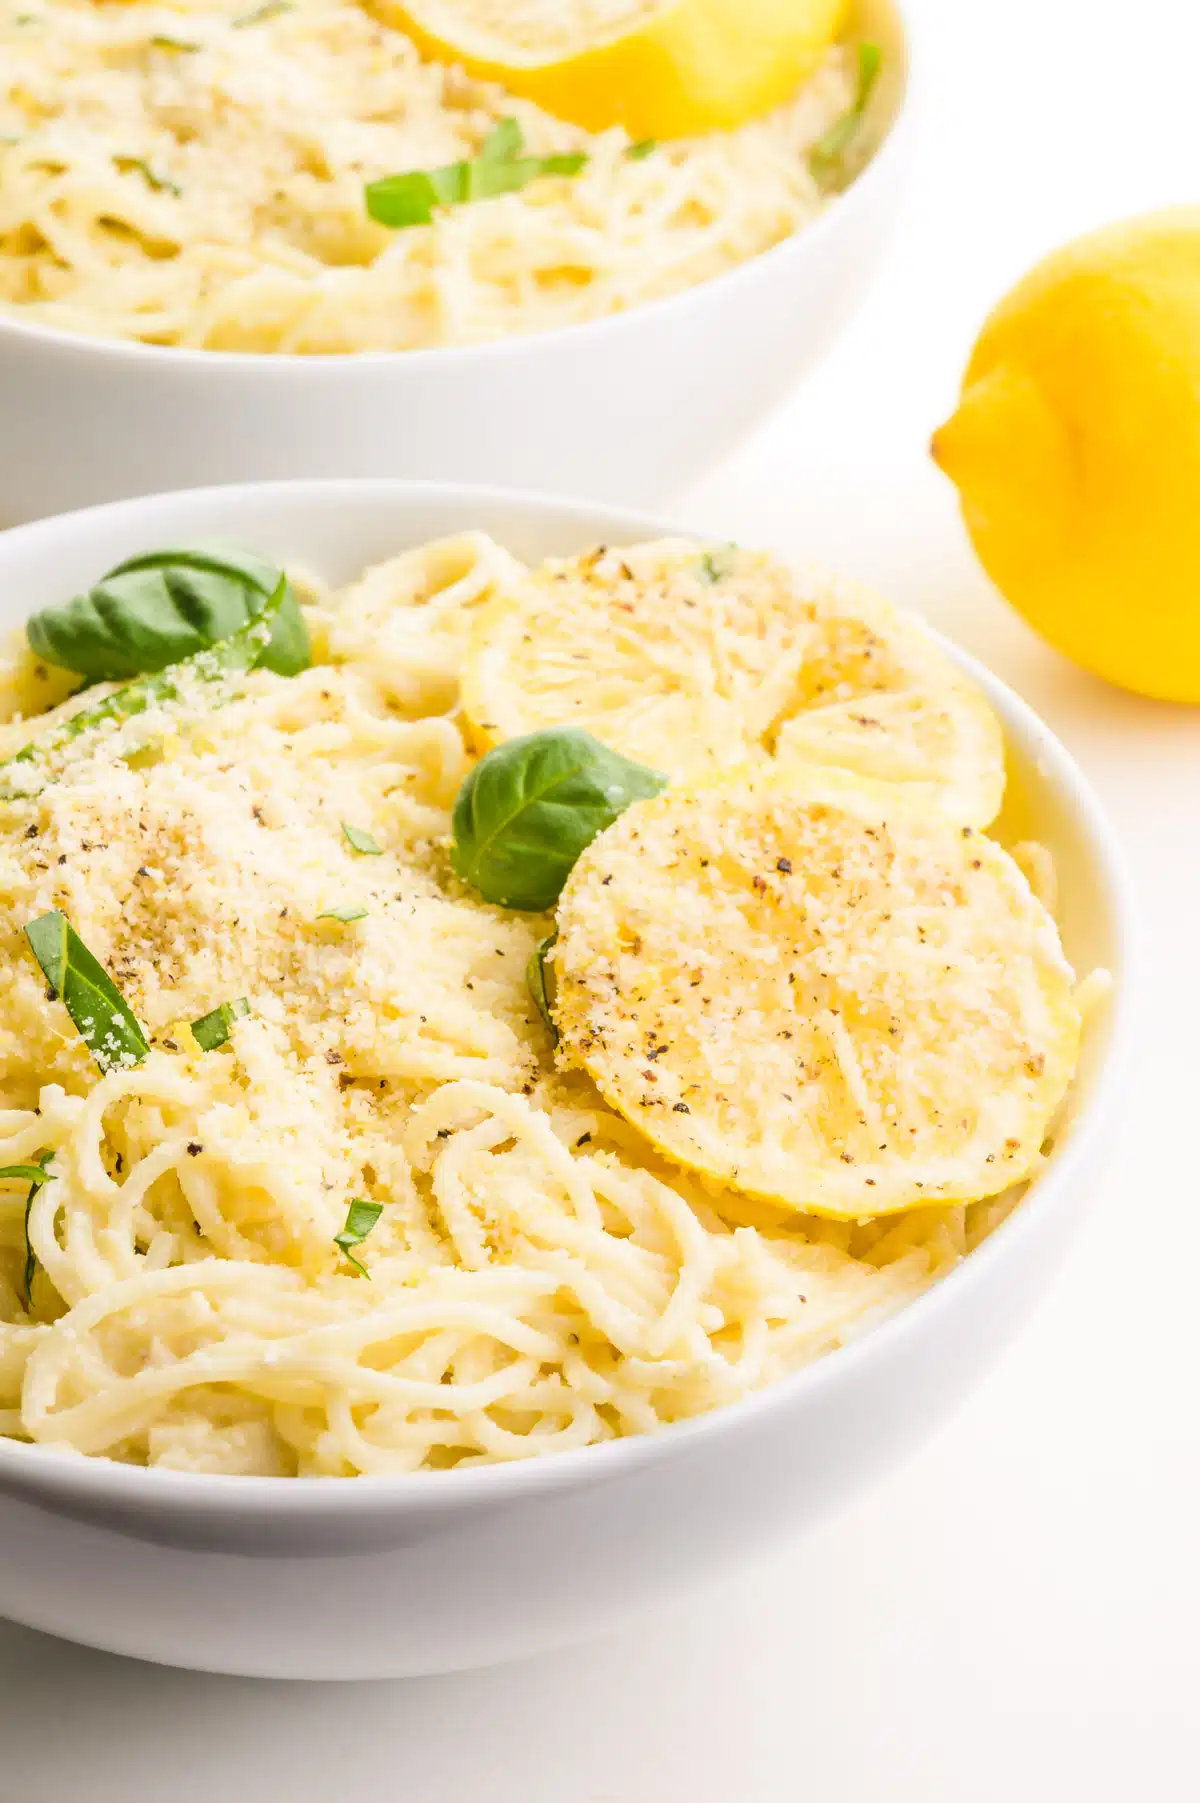 A bowl of pasta has lemon slices on top and fresh basil. There is another bowl in the background and a fresh lemon.